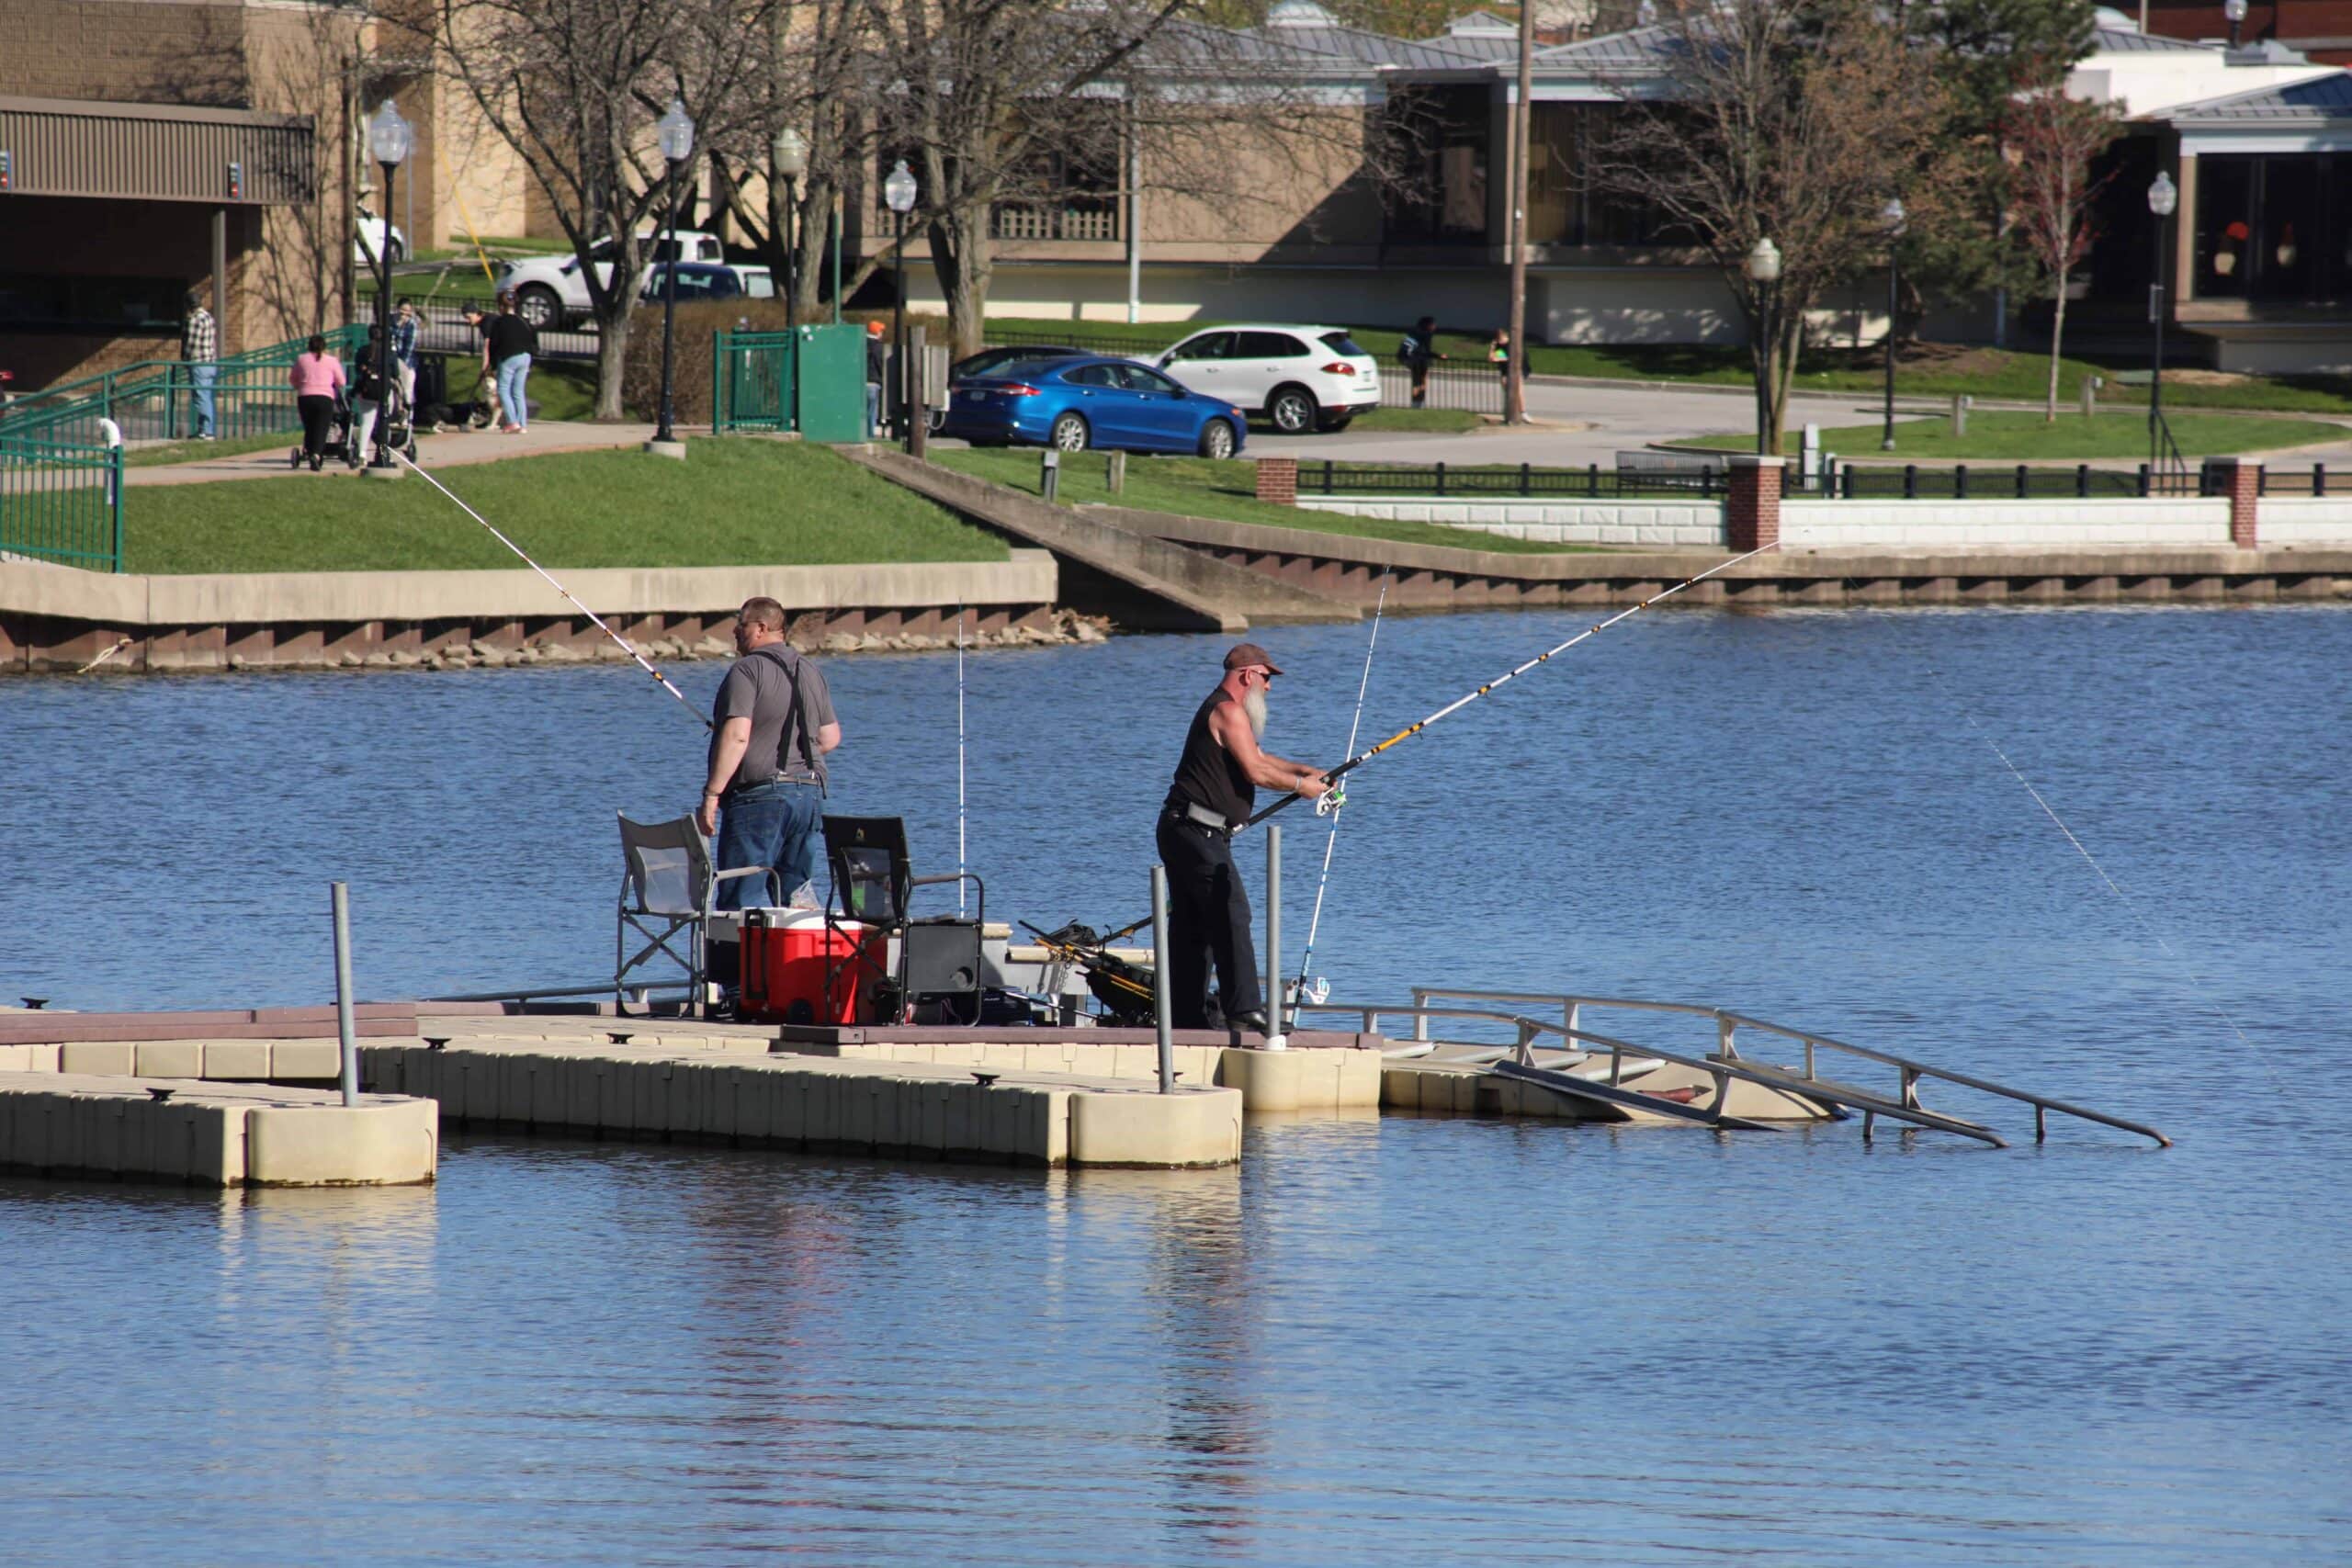 Friends take every advantage of the mid outbreak of pleasant weather to do some fishing off of the docks at Festival Park on Lake George's North shore.